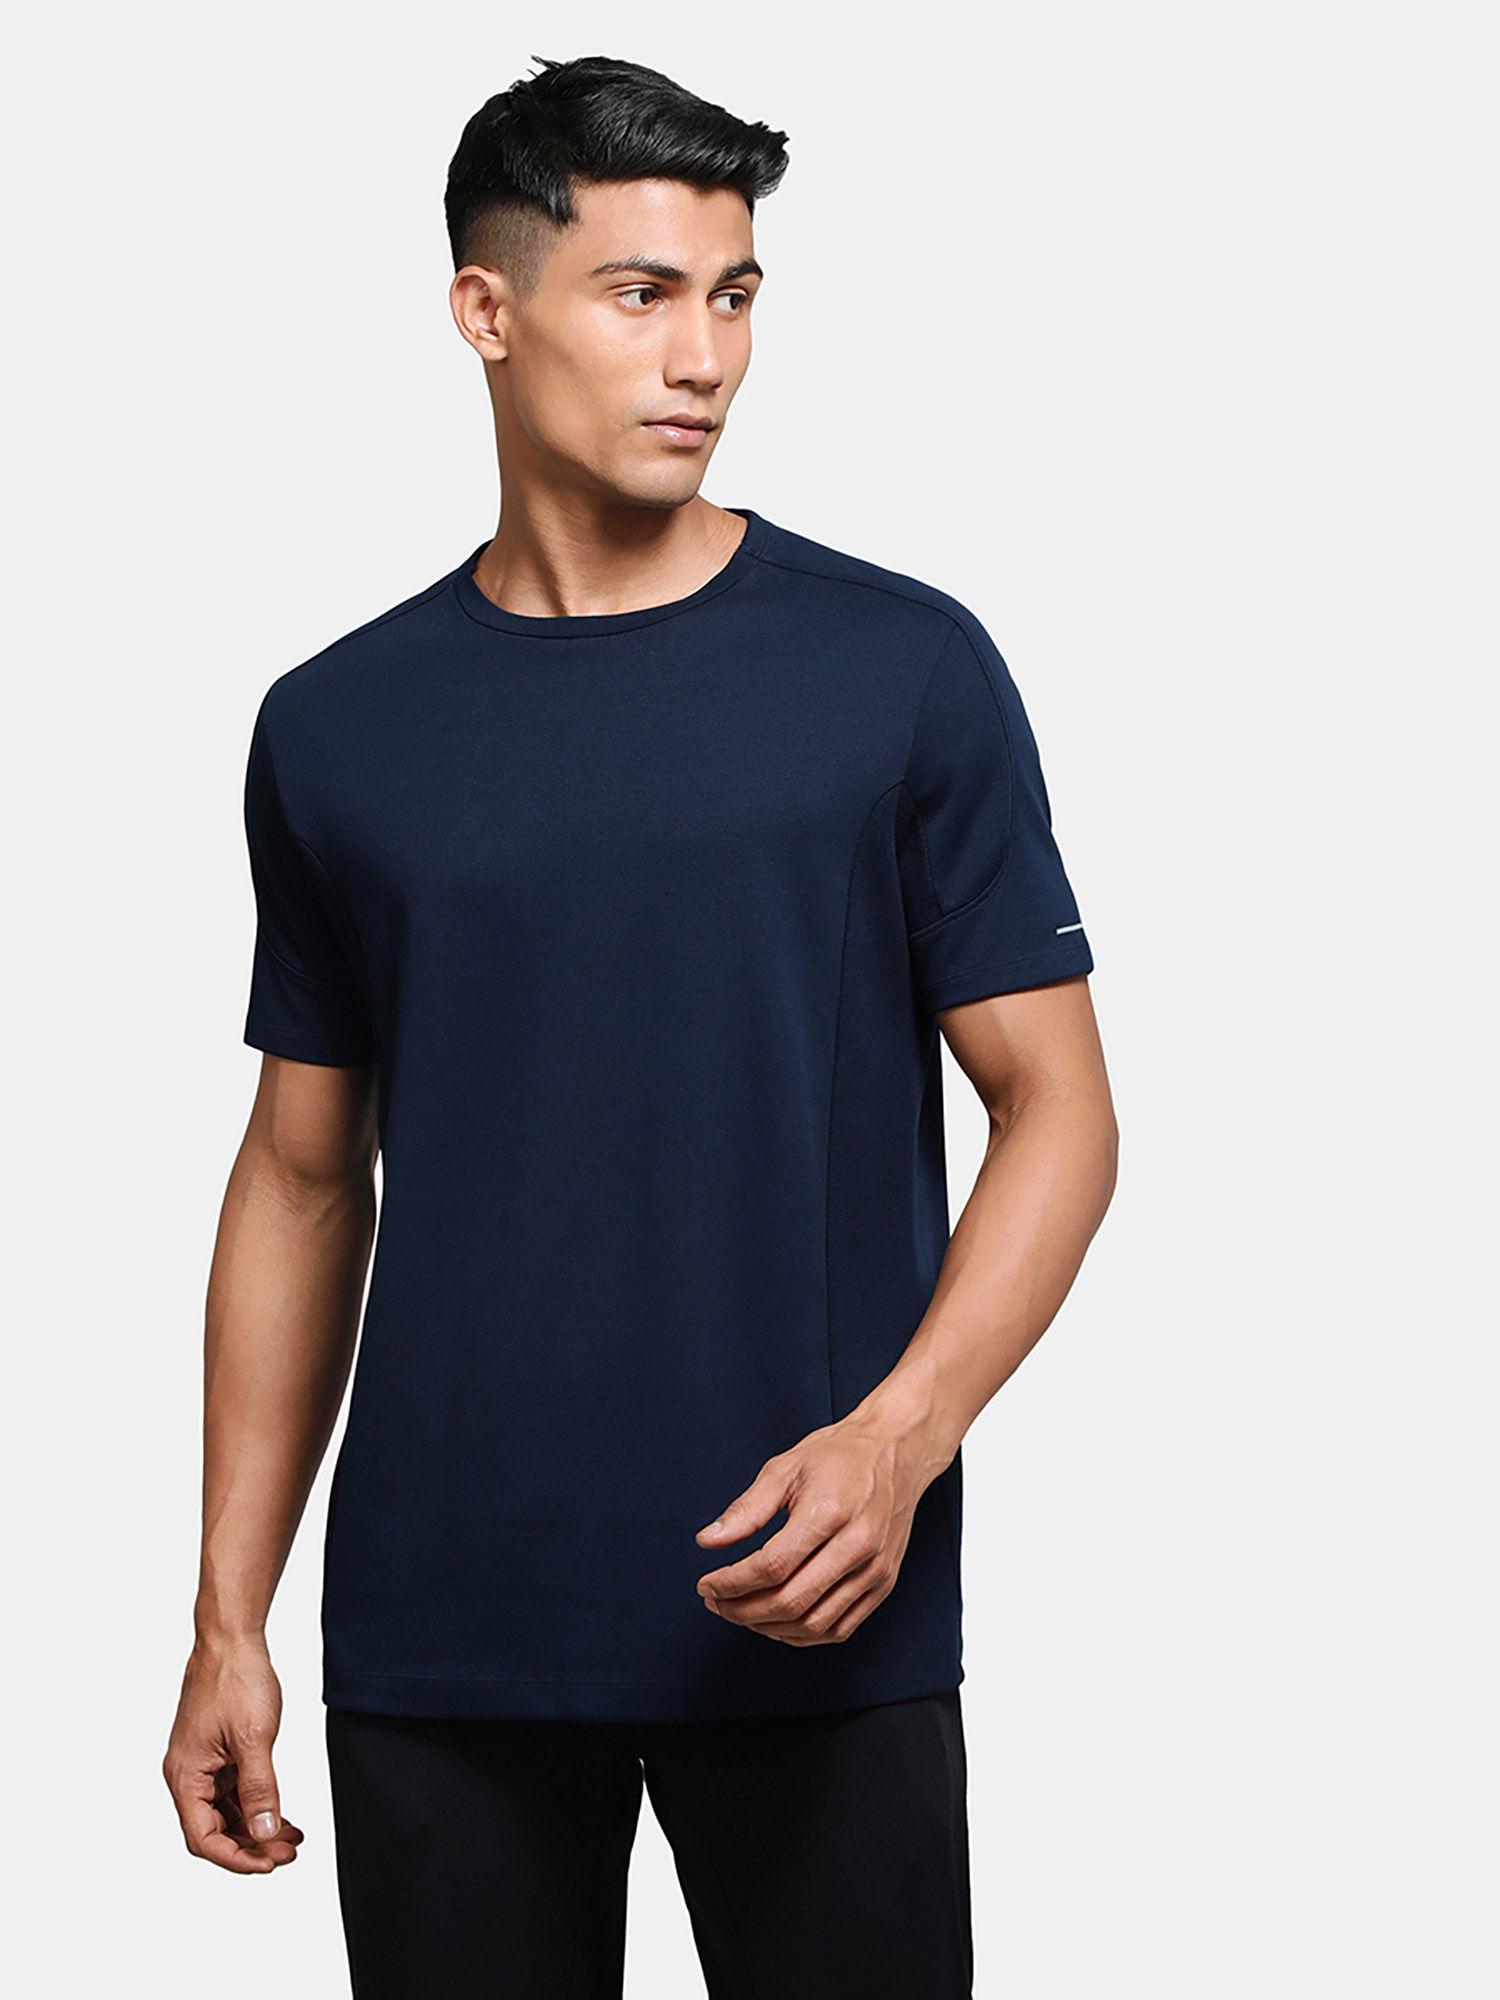 mv01 mens cotton blend solid round neck t-shirt with stay fresh treatment-navy